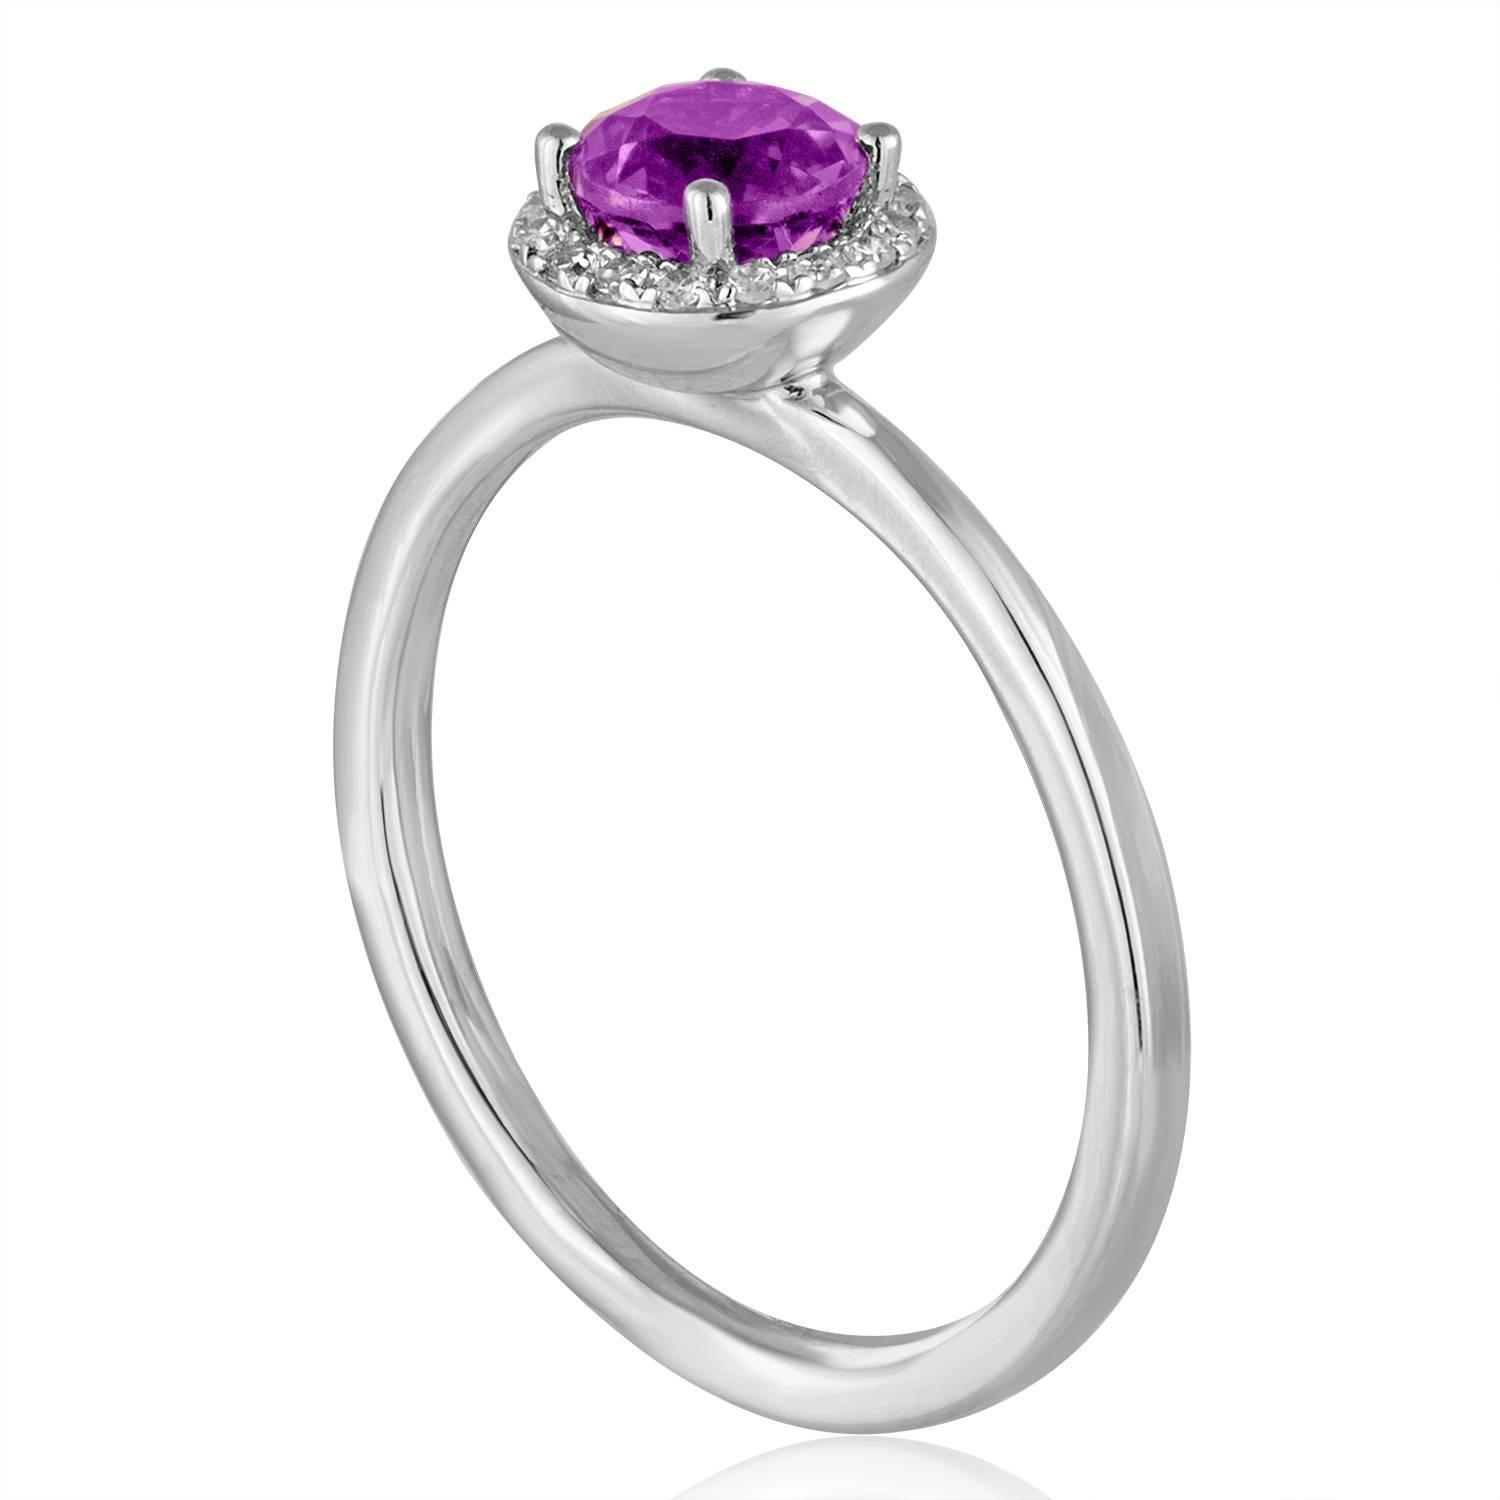 Stackable Amethyst Ring
The ring is 14K White Gold
There are 0.06 Carats In Diamonds H SI
The Center Stone is Round 0.46 Carat Amethyst
The top measures 5/16